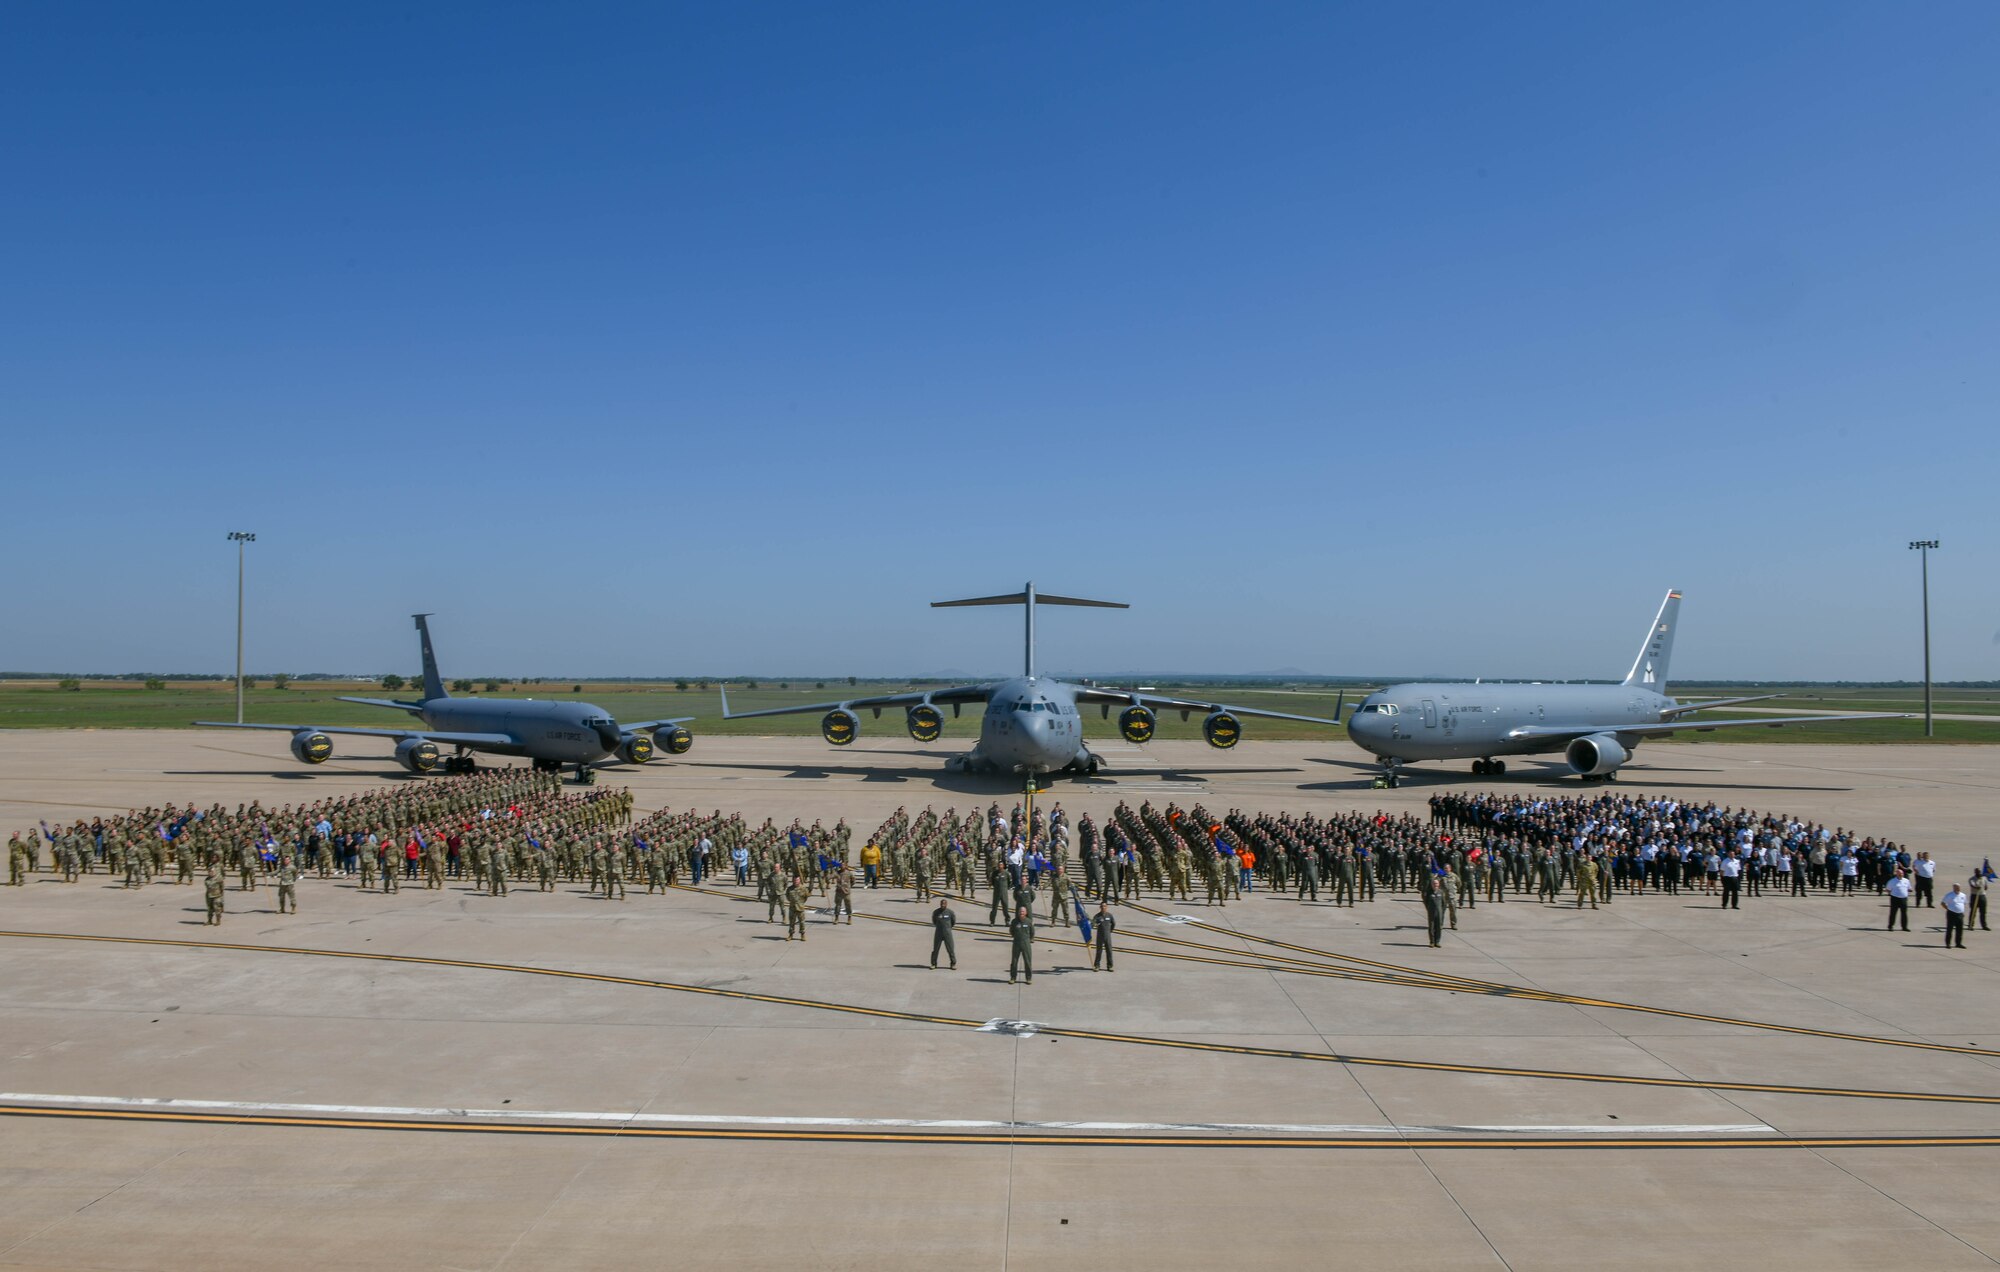 Airmen from the 97th Air Mobility Wing (AMW) pose for a photo at Altus Air Force Base, Oklahoma, May 12, 2023. The 97th AMW is composed of almost 1,300 active military personnel and about 1,200 civilians. (U.S. Air Force photo by Senior Airman Trenton Jancze)